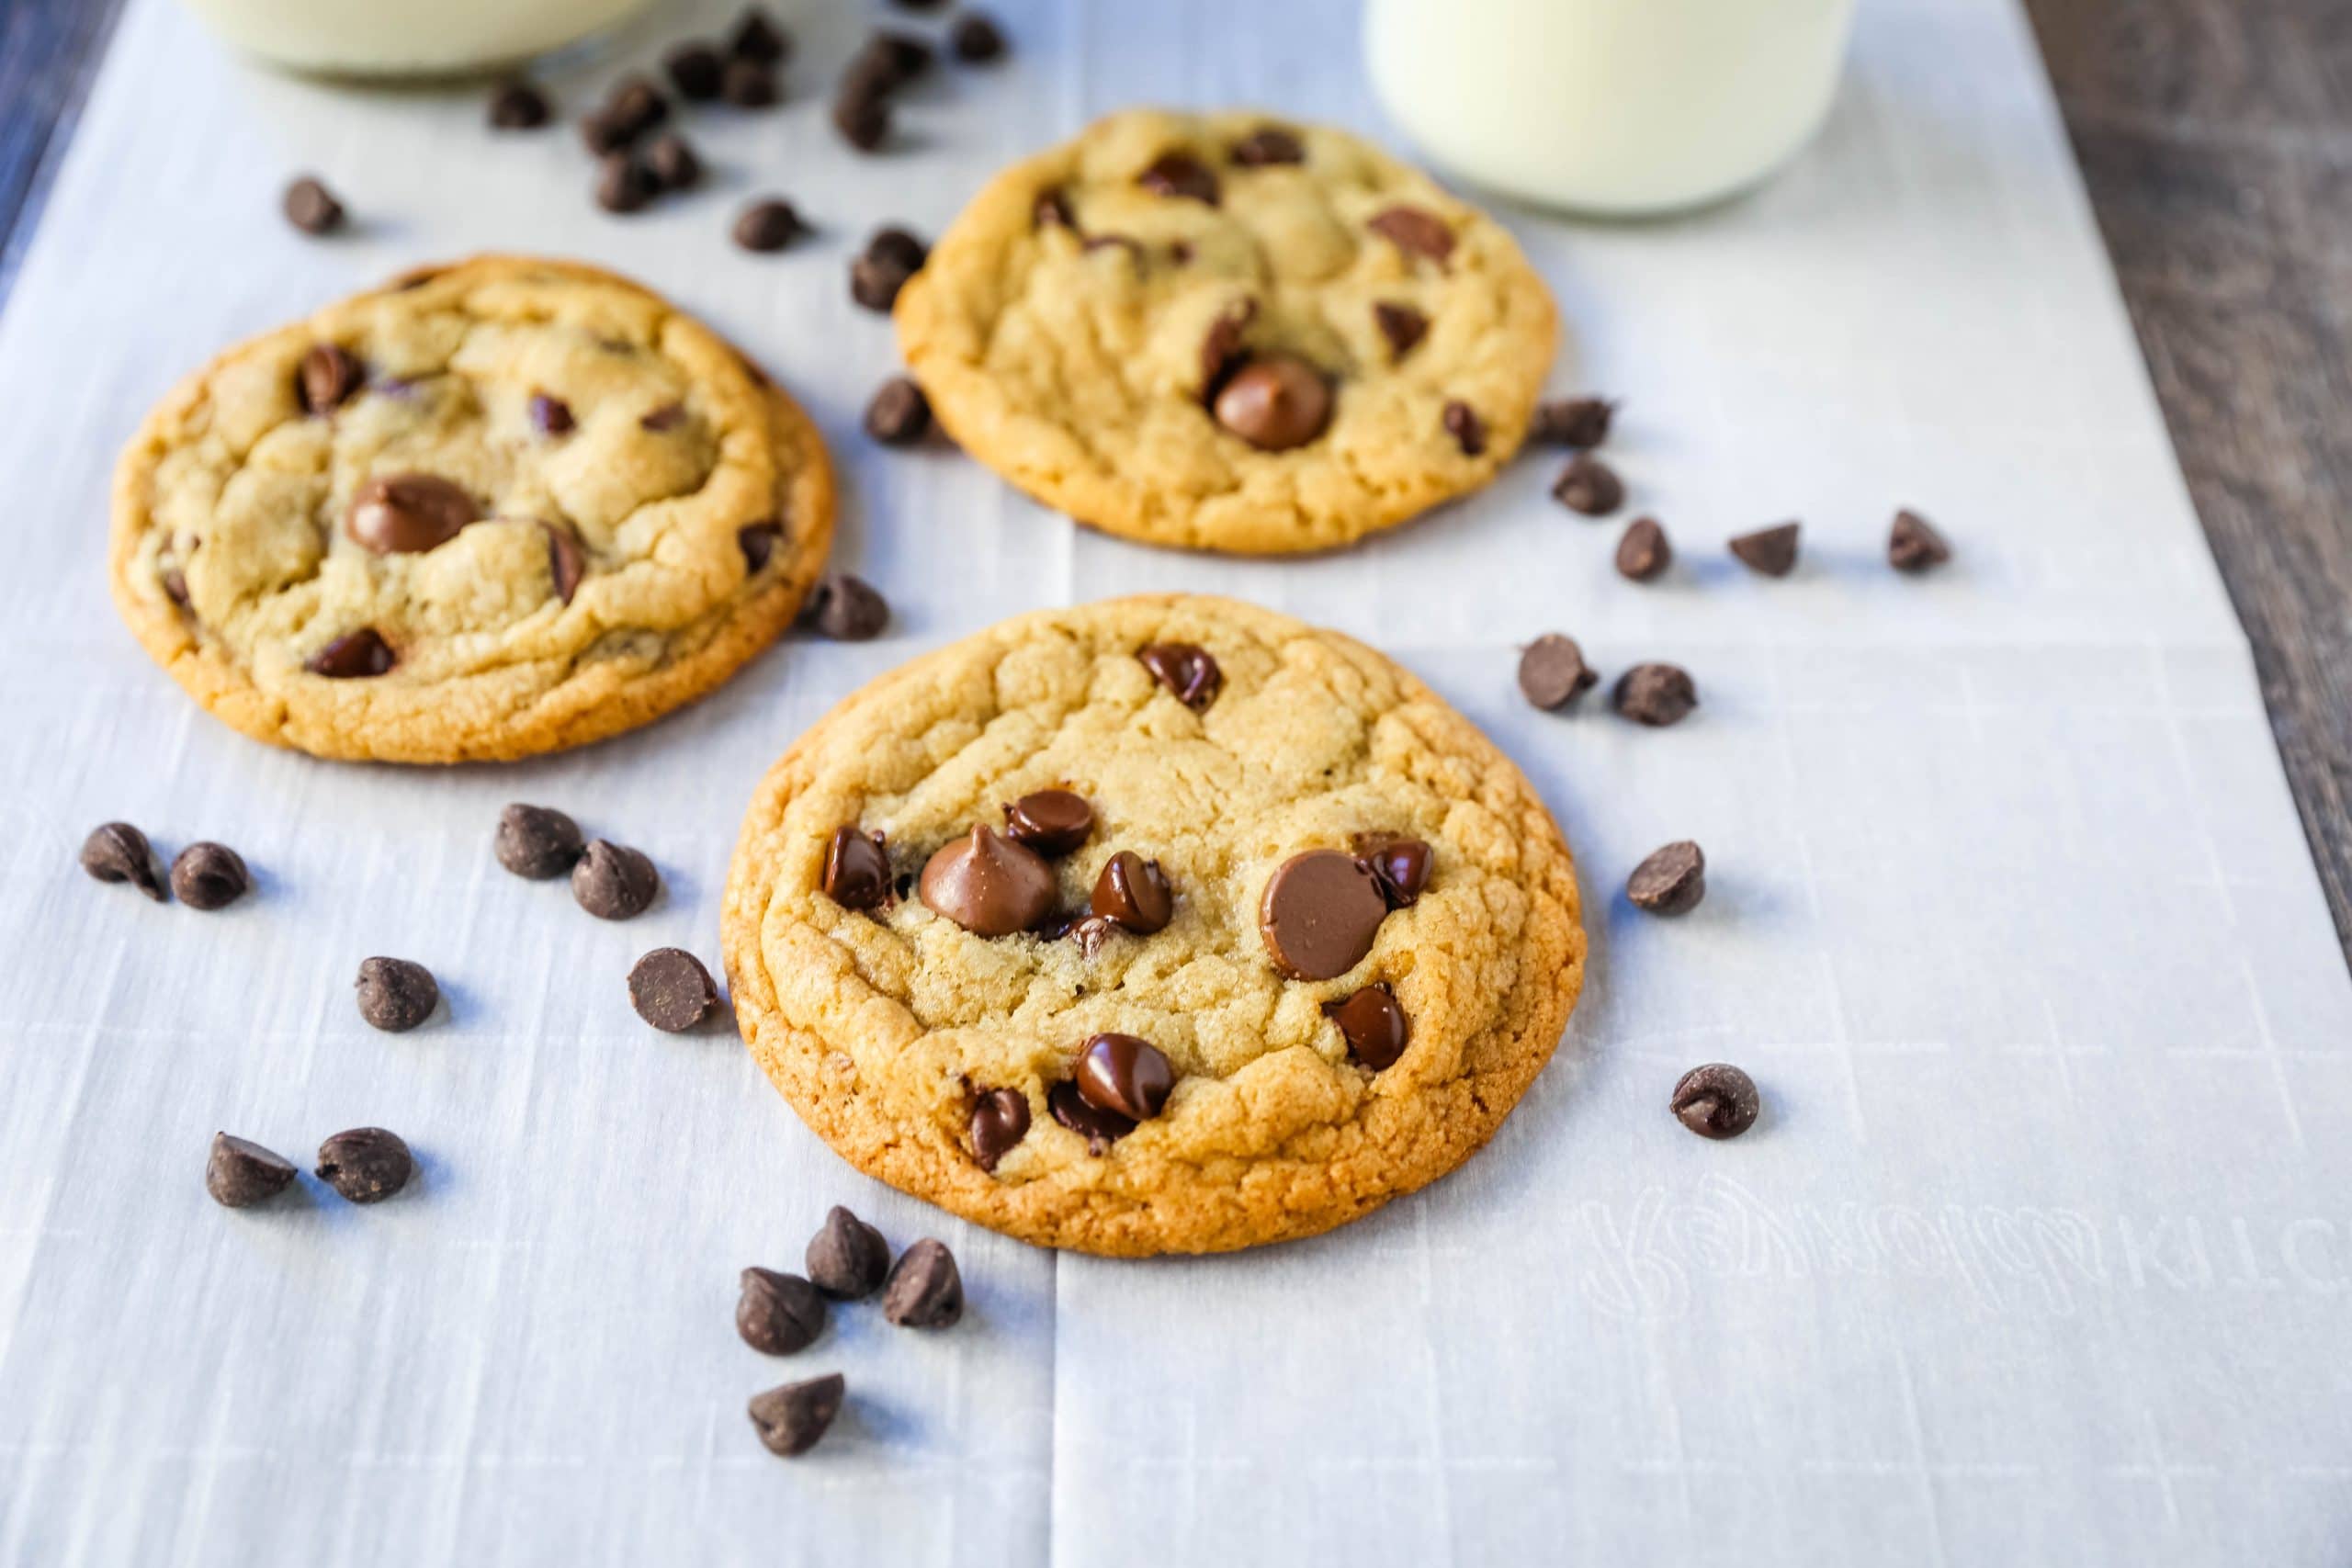 ONE BOWL CHOCOLATE CHIP COOKIE RECIPE An easy one bowl cookie recipe that creates a chewy chocolate chip cookie with crisp buttery edges.  www.modernhoney.com #cookie #cookies #chocolatechipcookie #chocolatechipcookies